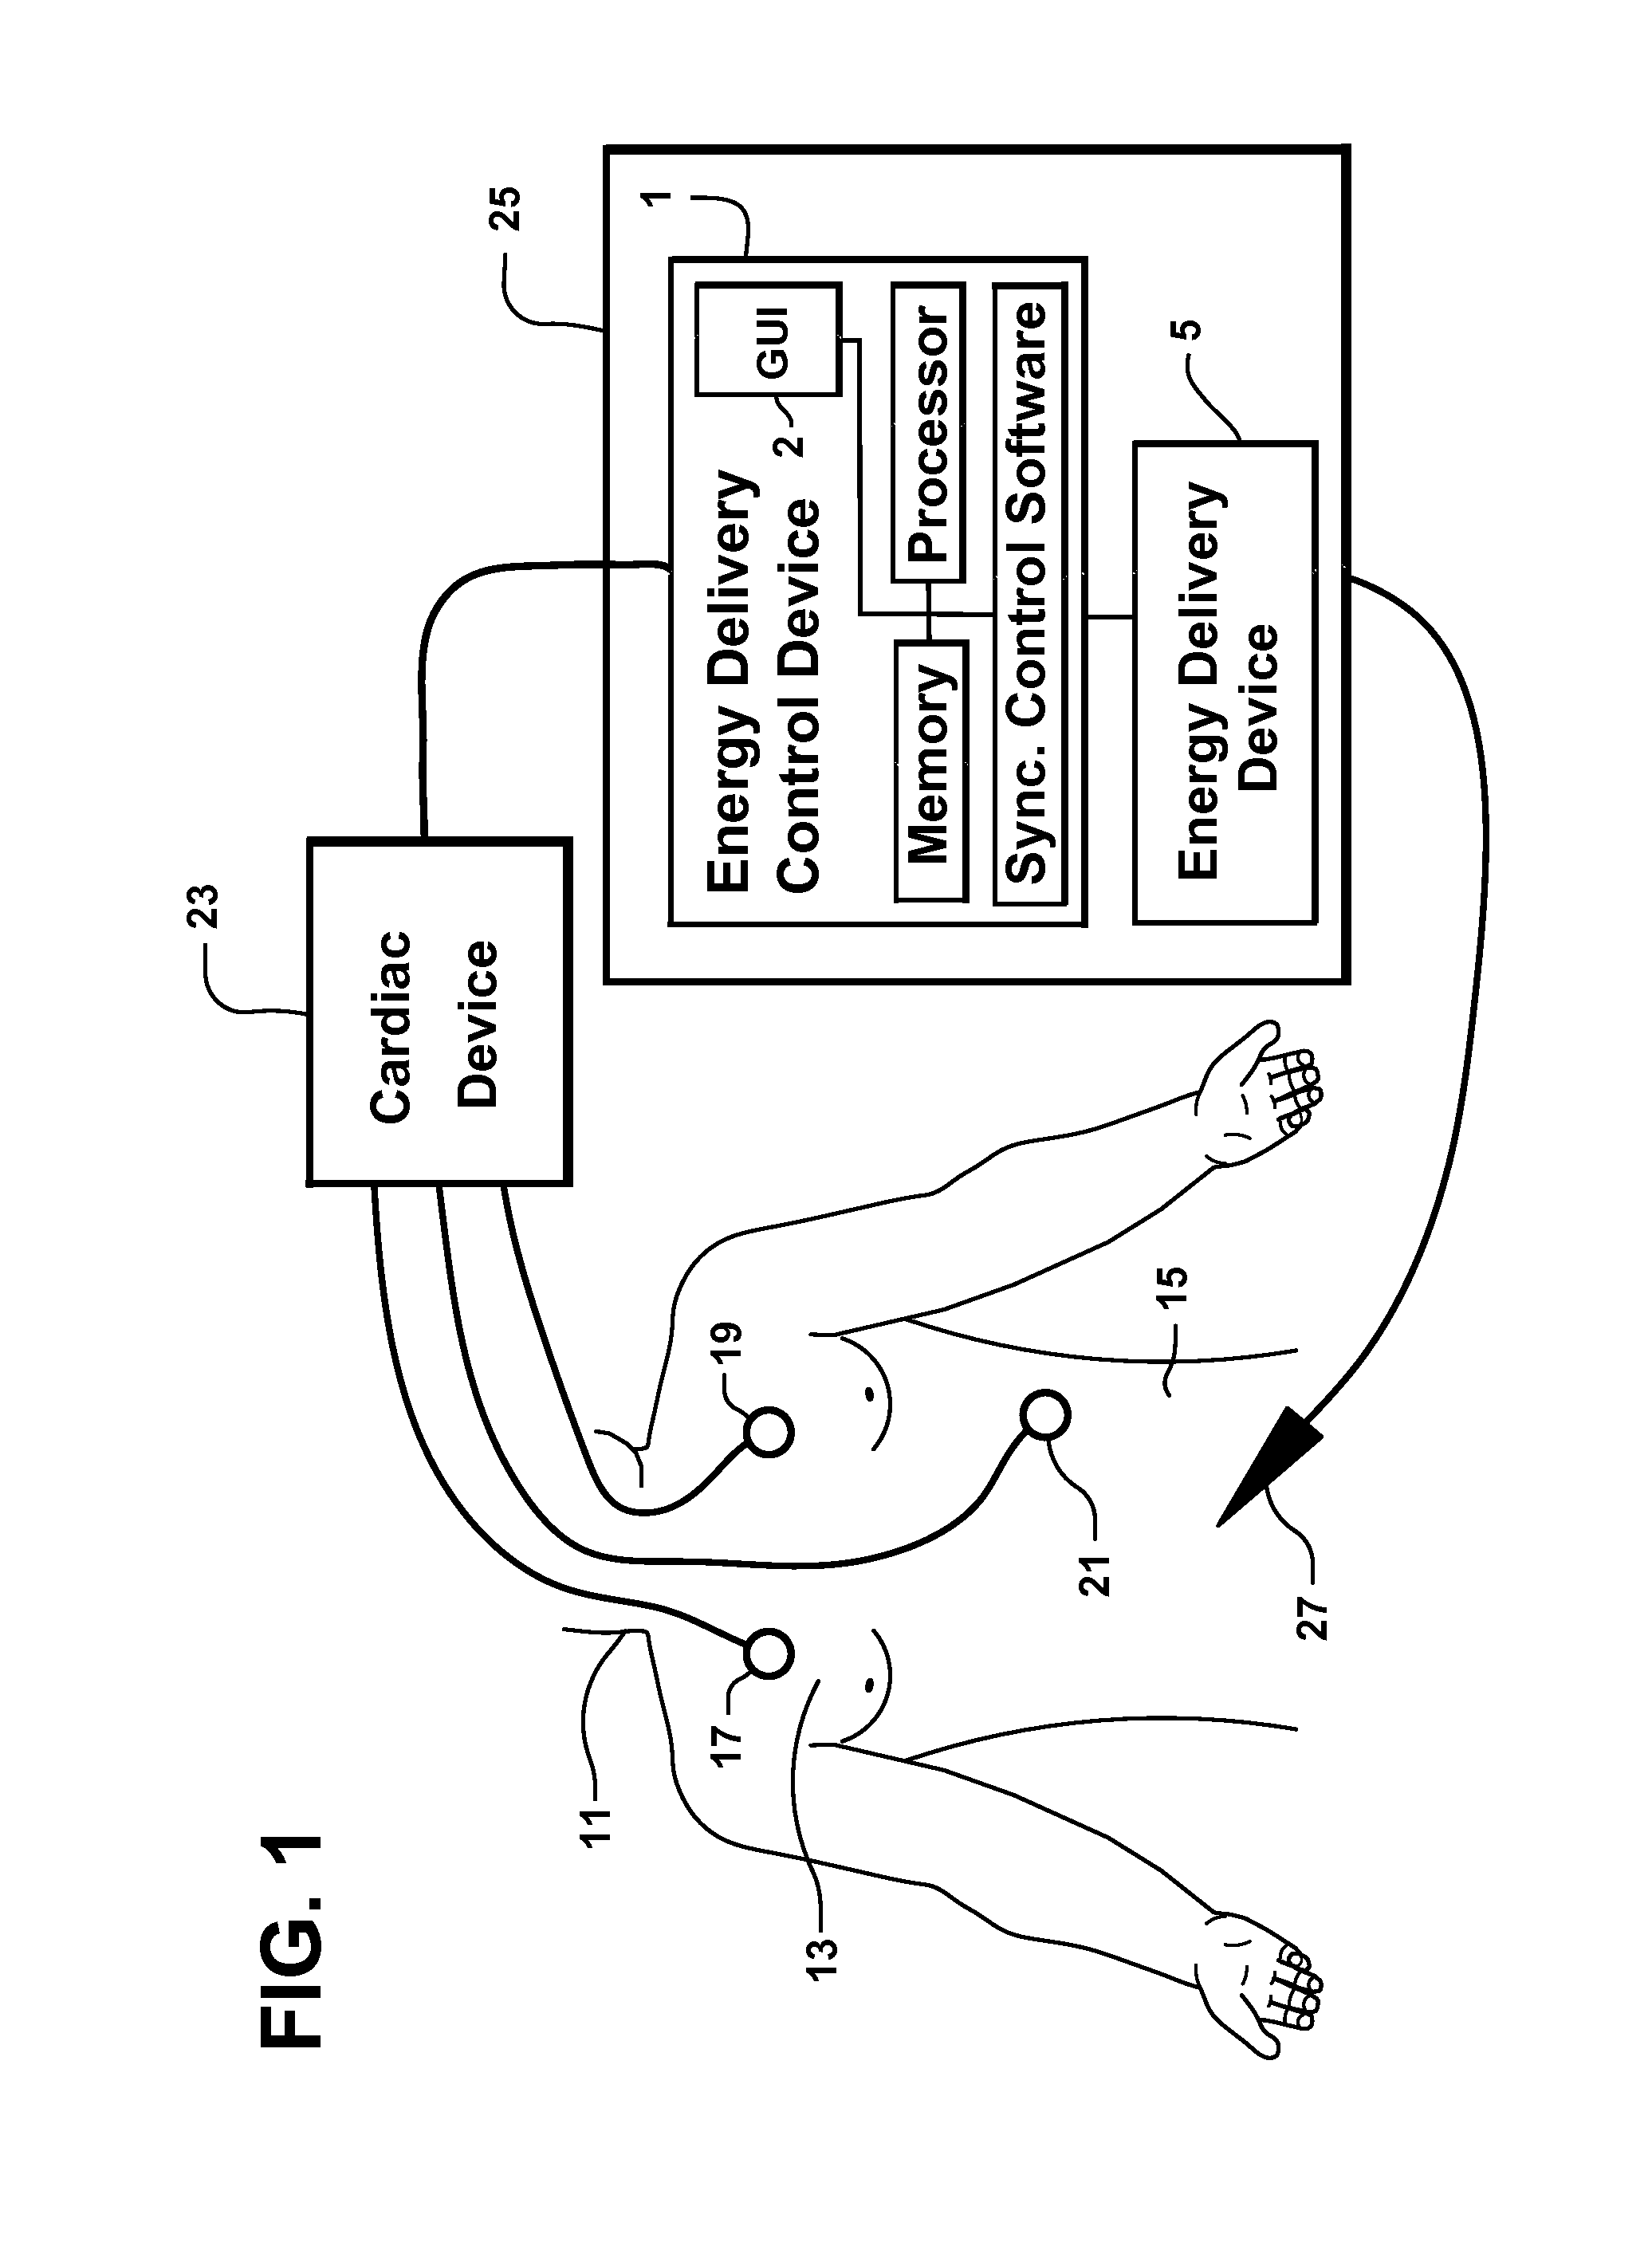 System and Method for Synchronizing Energy Delivery to the Cardiac Rhythm